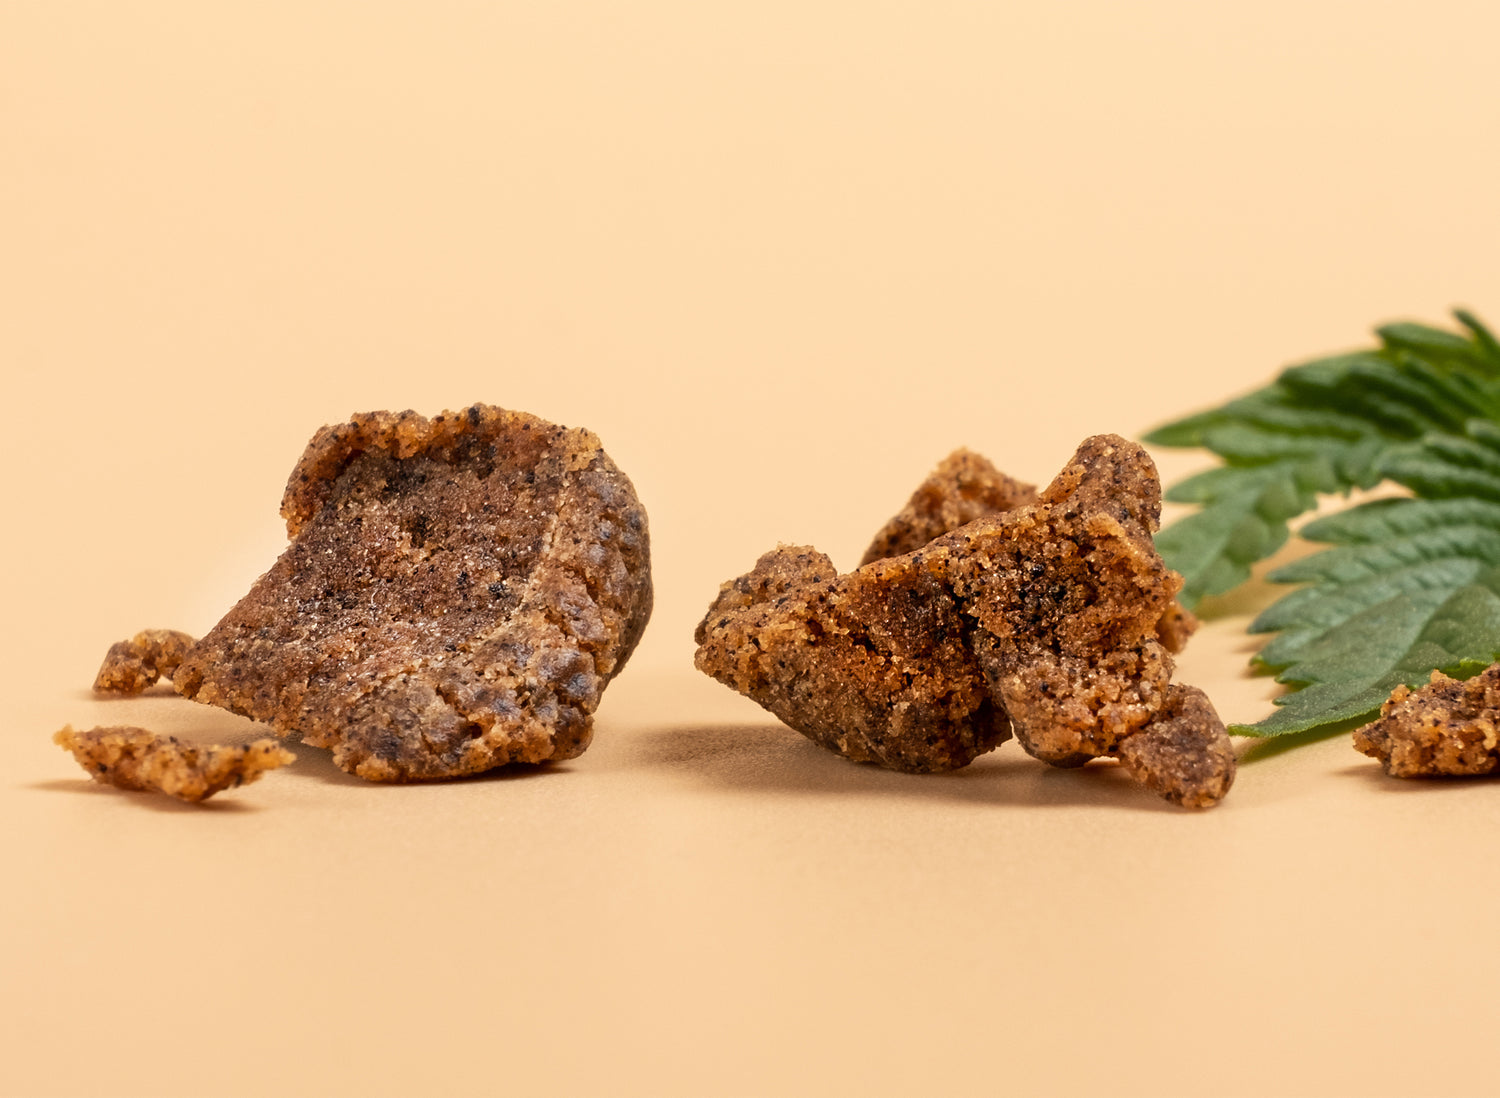 What Is Bubble Hash?